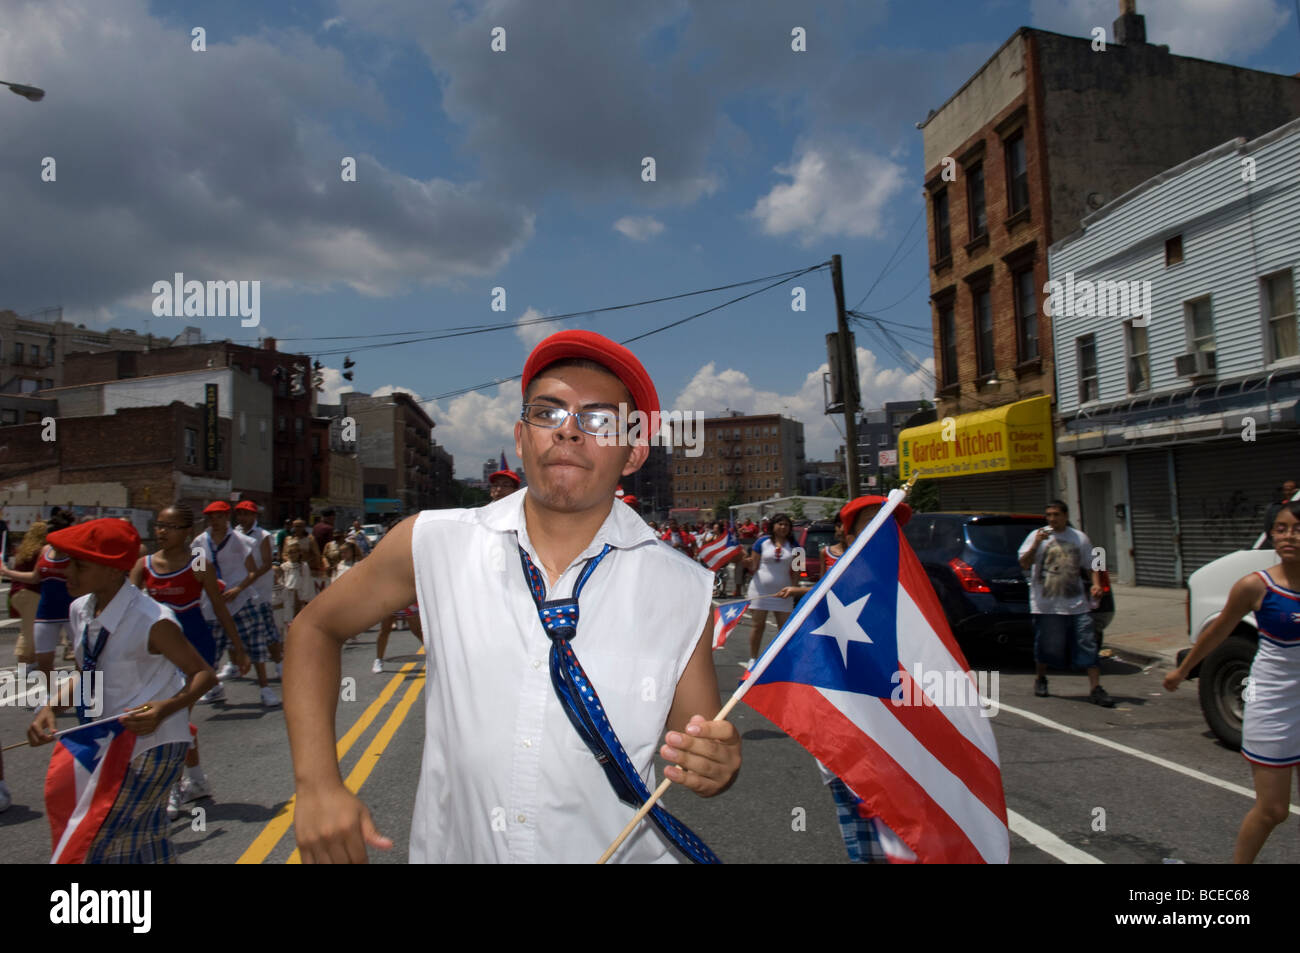 The Brooklyn Puerto Rican Day Parade marches through the Bushwick neighborhood of Brooklyn in New York Stock Photo